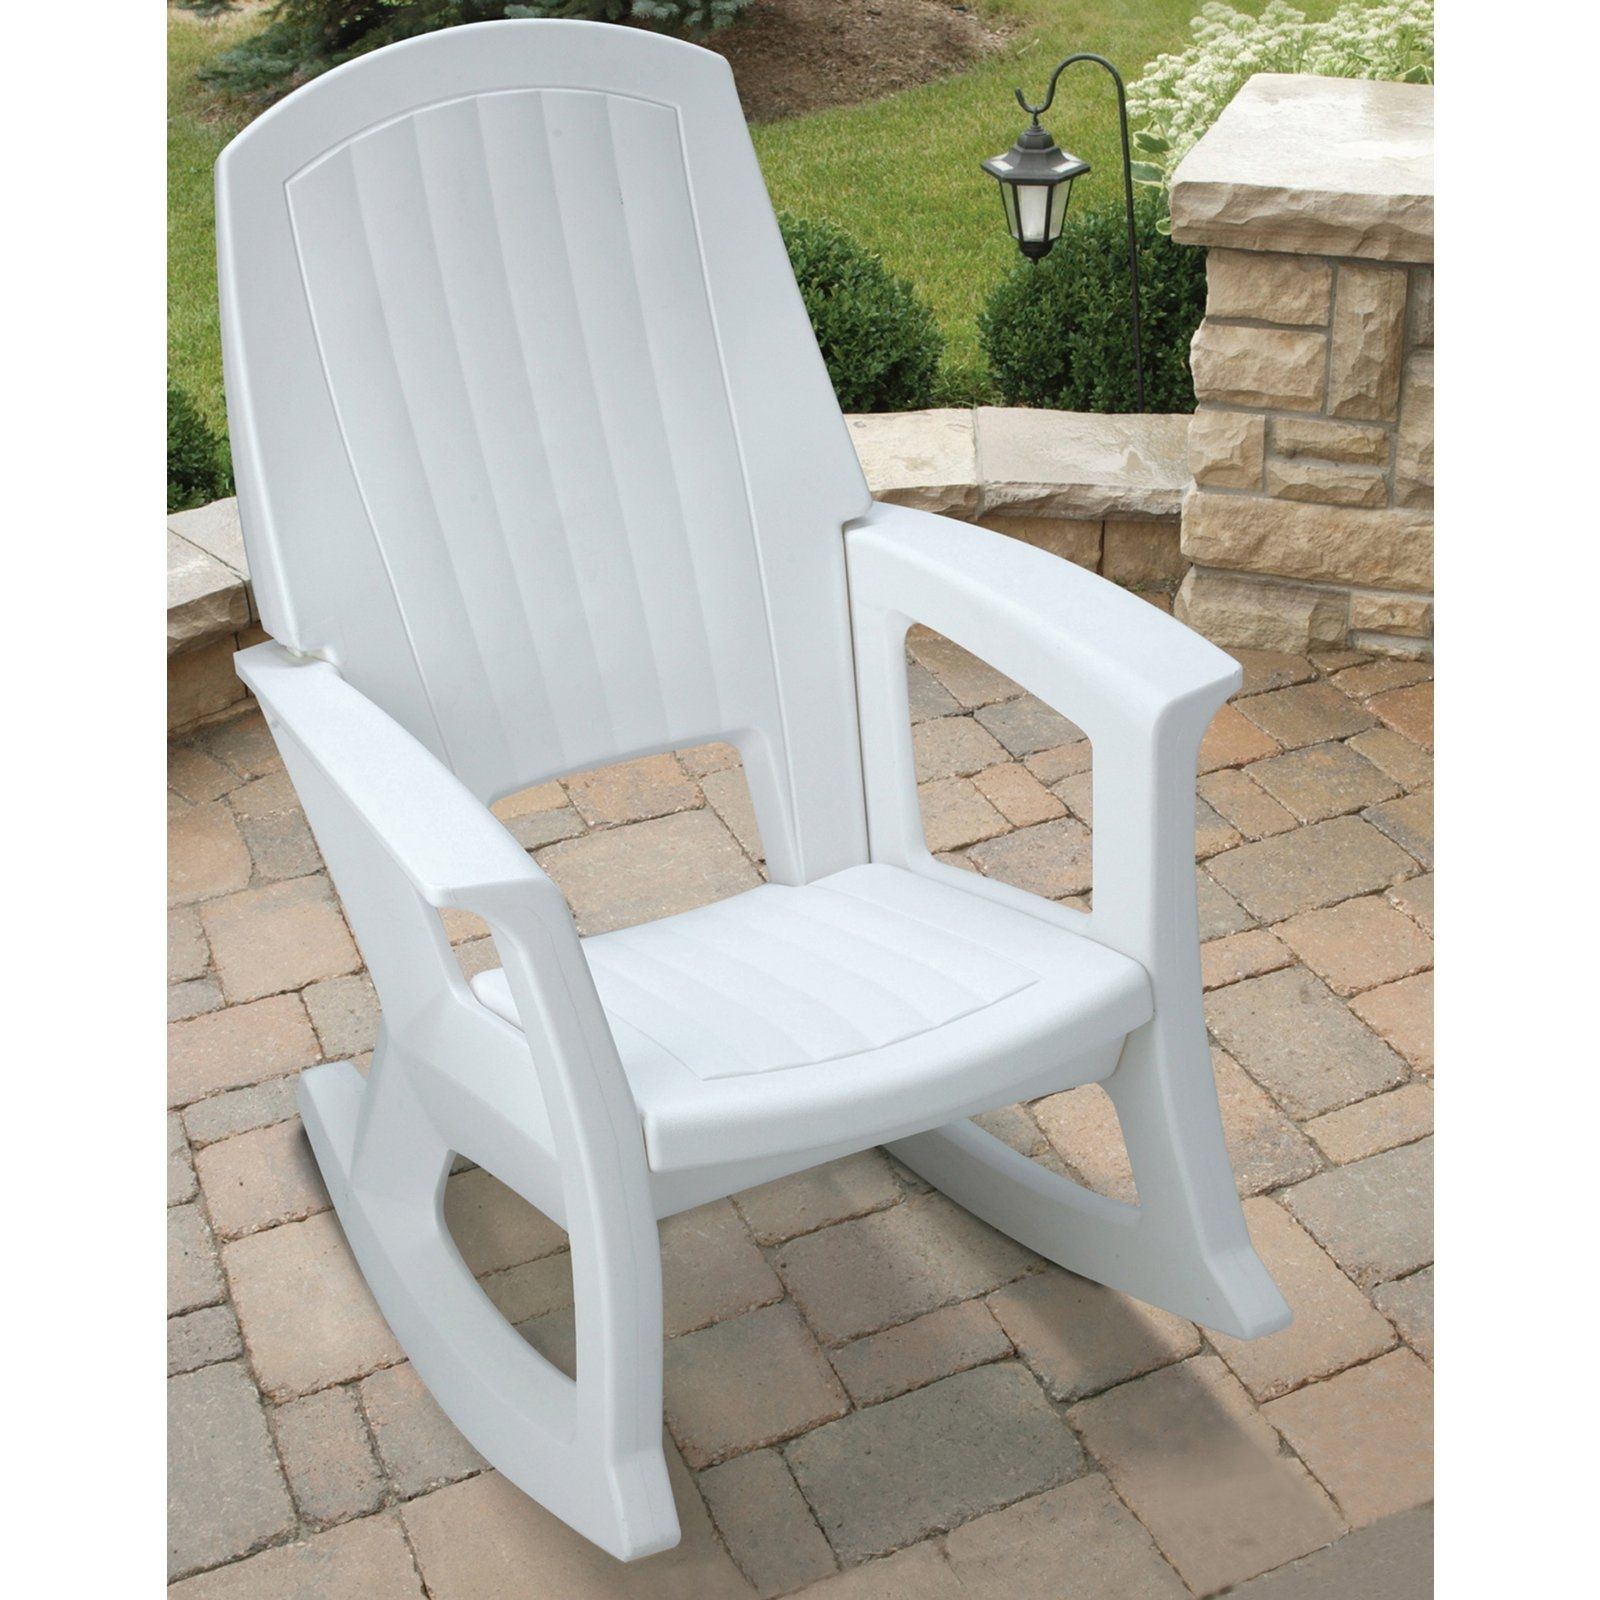 Well Known Semco Recycled Plastic Rocking Chair – Walmart Inside Outdoor Vinyl Rocking Chairs (View 1 of 15)